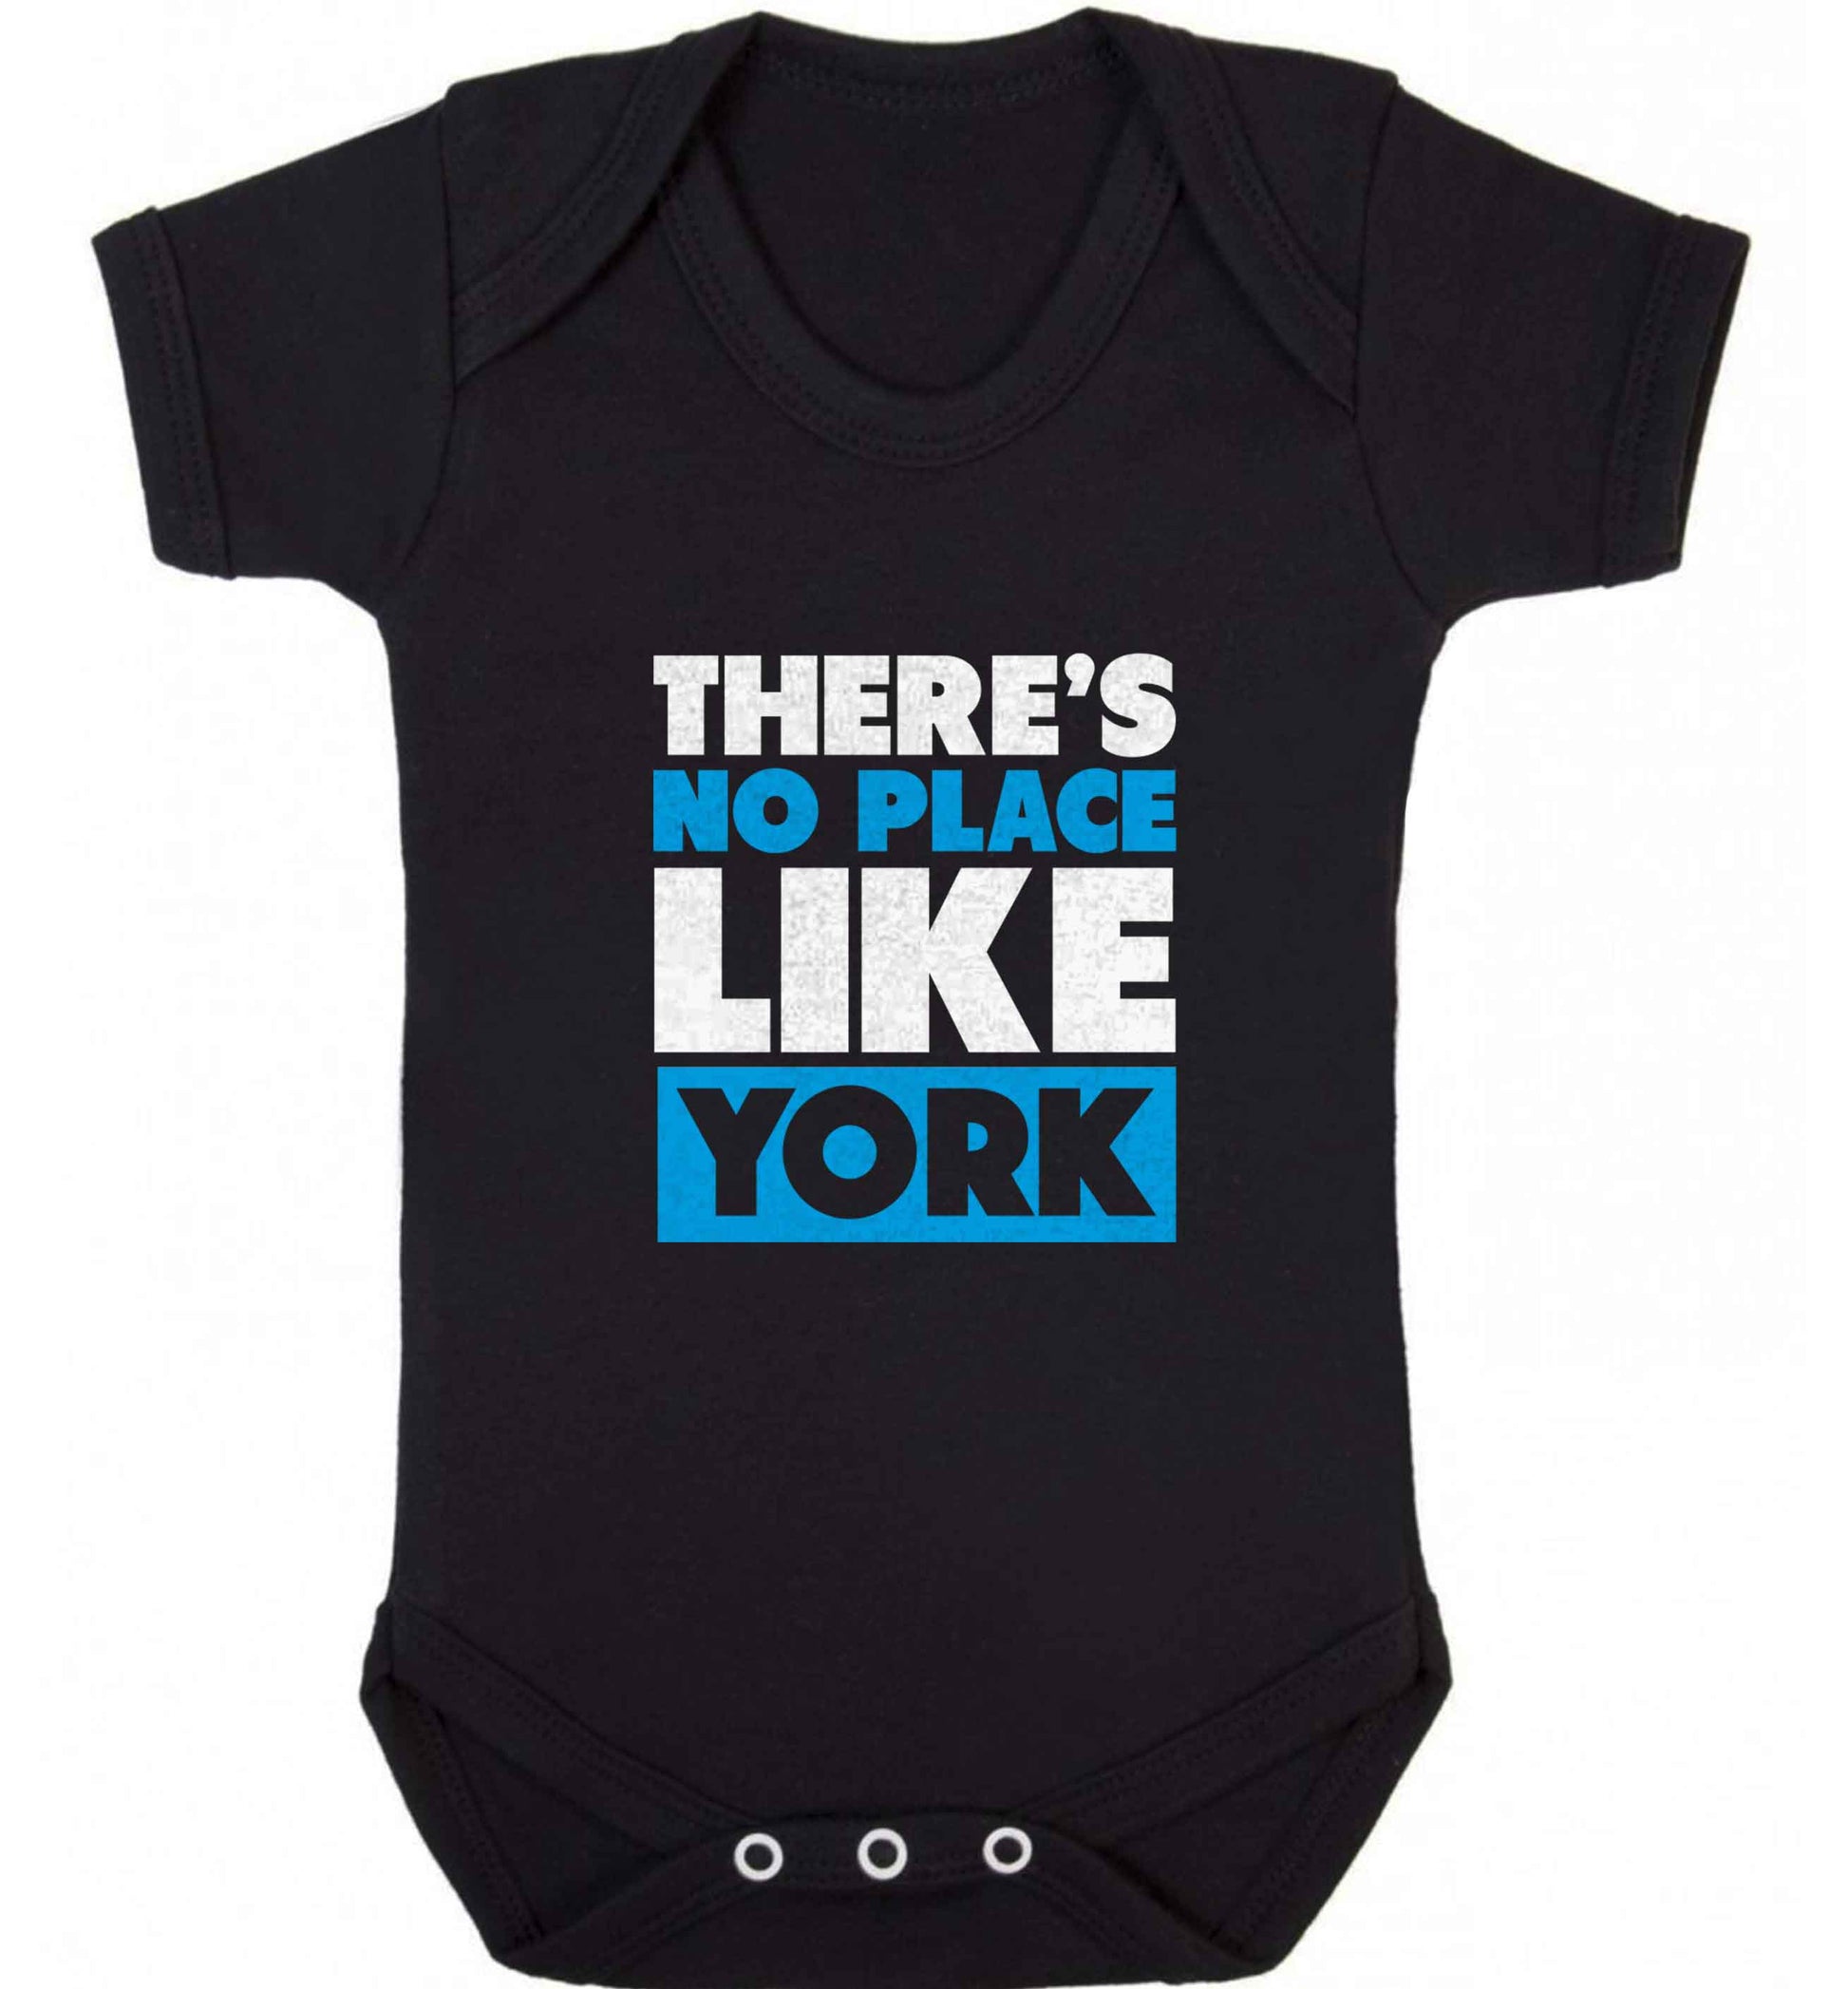 There's no place like york baby vest black 18-24 months